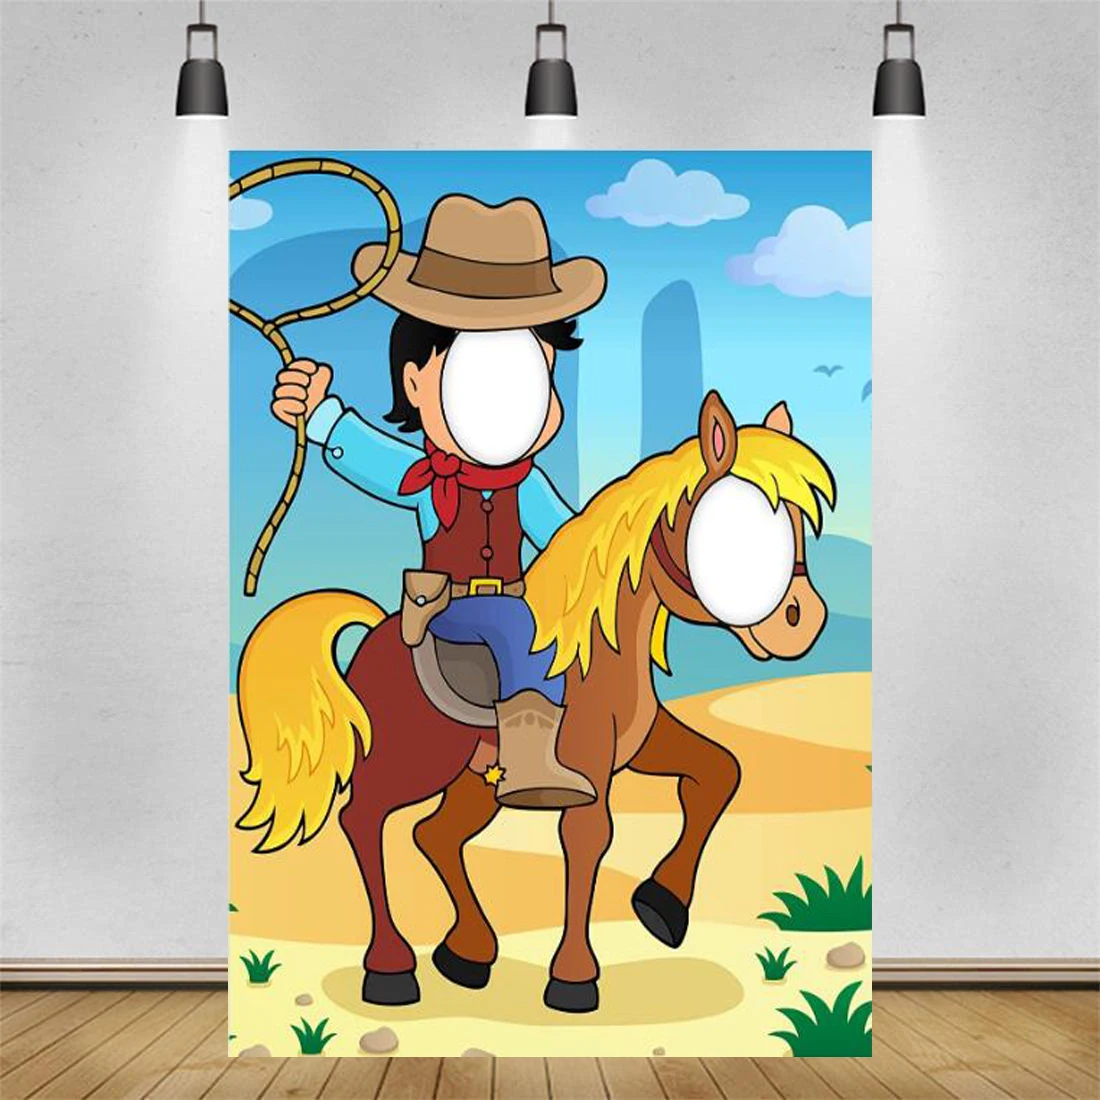 

West Cowboy Horse Banner Backdrop Pretend Play Game Photo Booth Props Cowpuncher The Lasso Decor For Rodeo Birthday Background